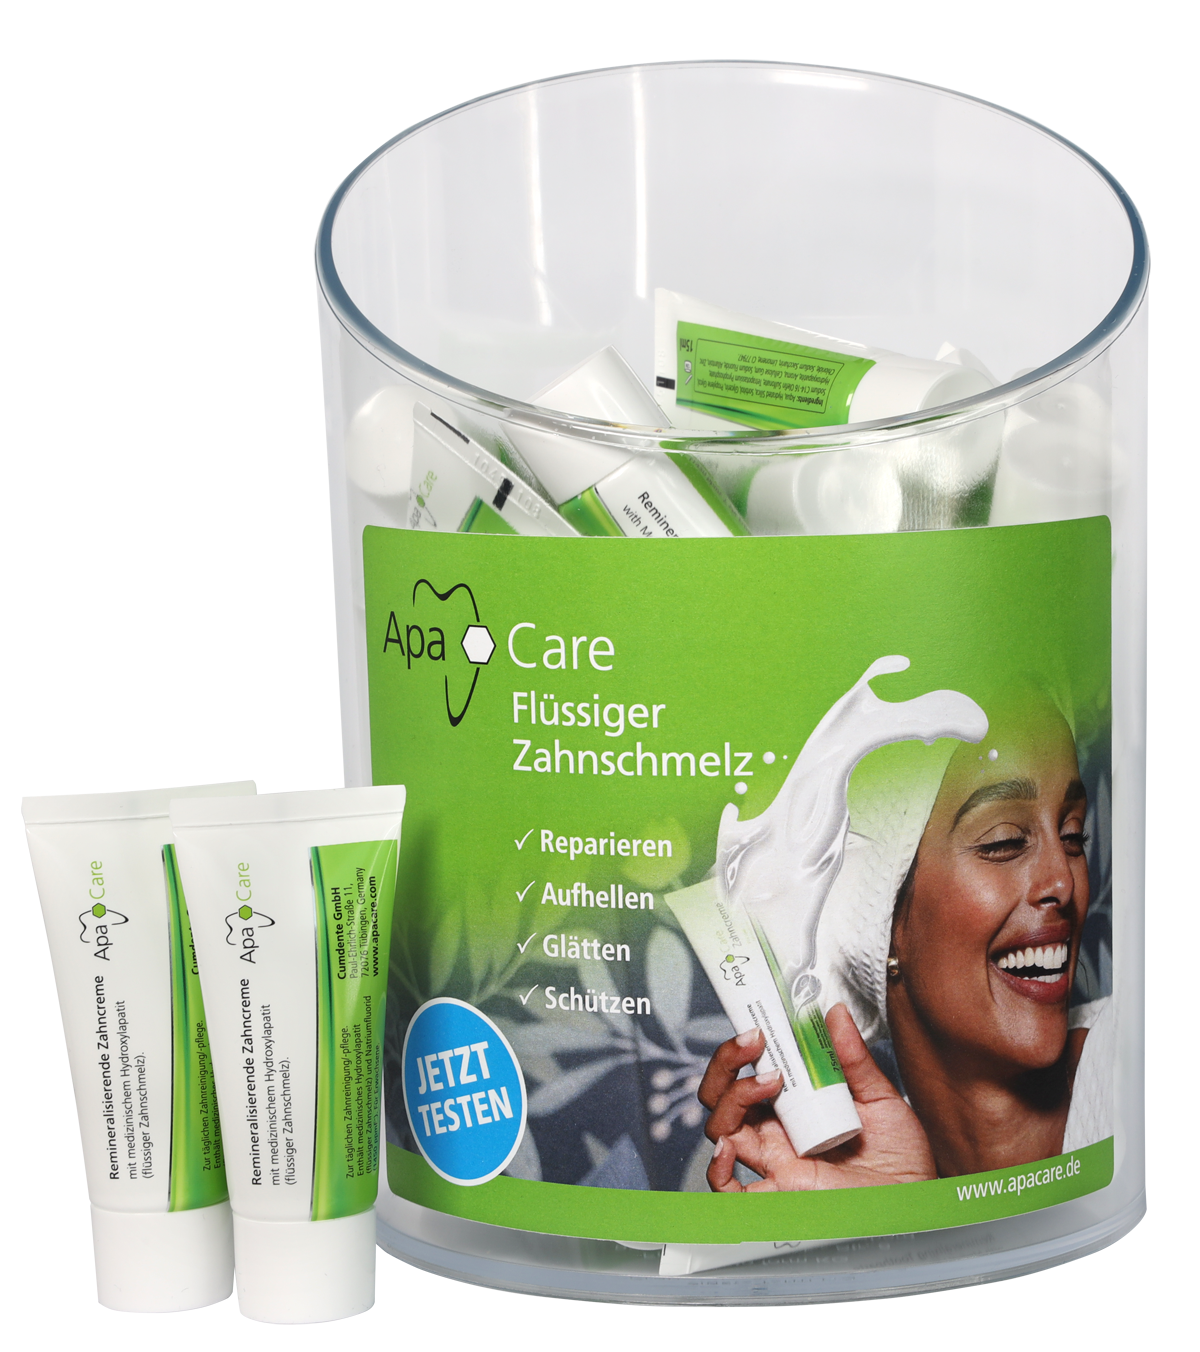  ApaCare Promotional package remineralising toothpaste 27 pcs.